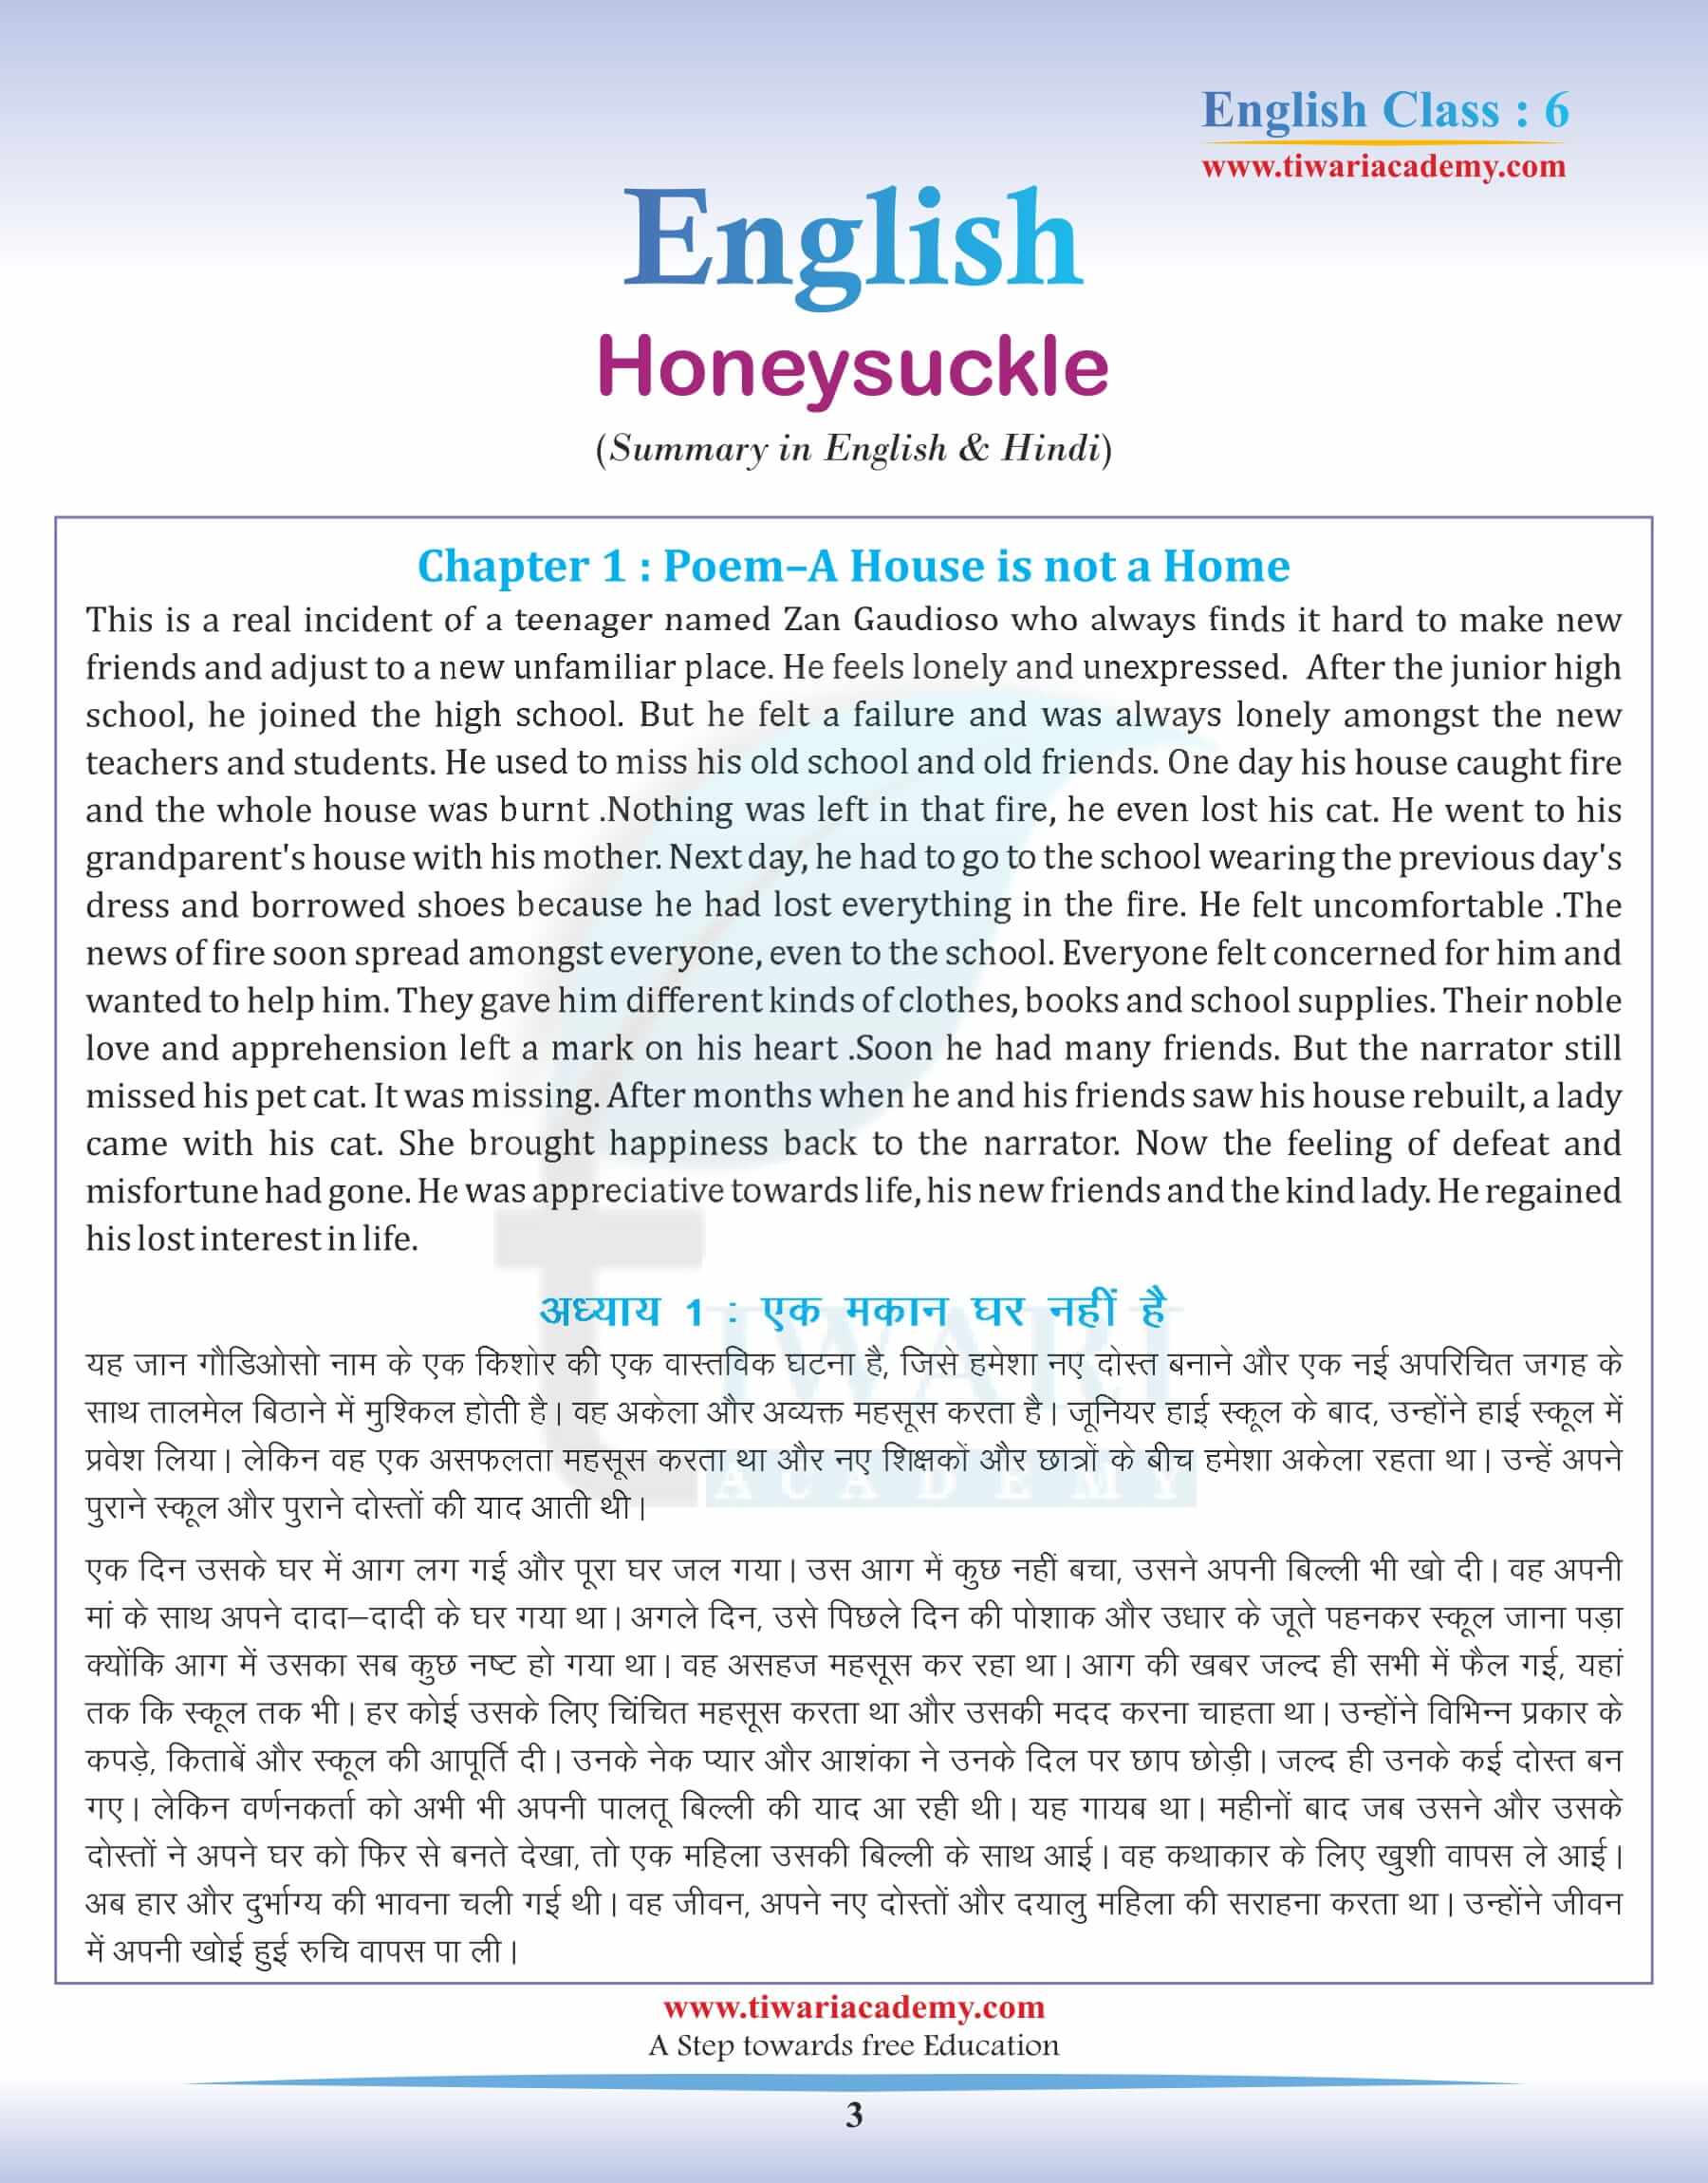 Class 6 English Chapter 1 Summary in Hindi and English